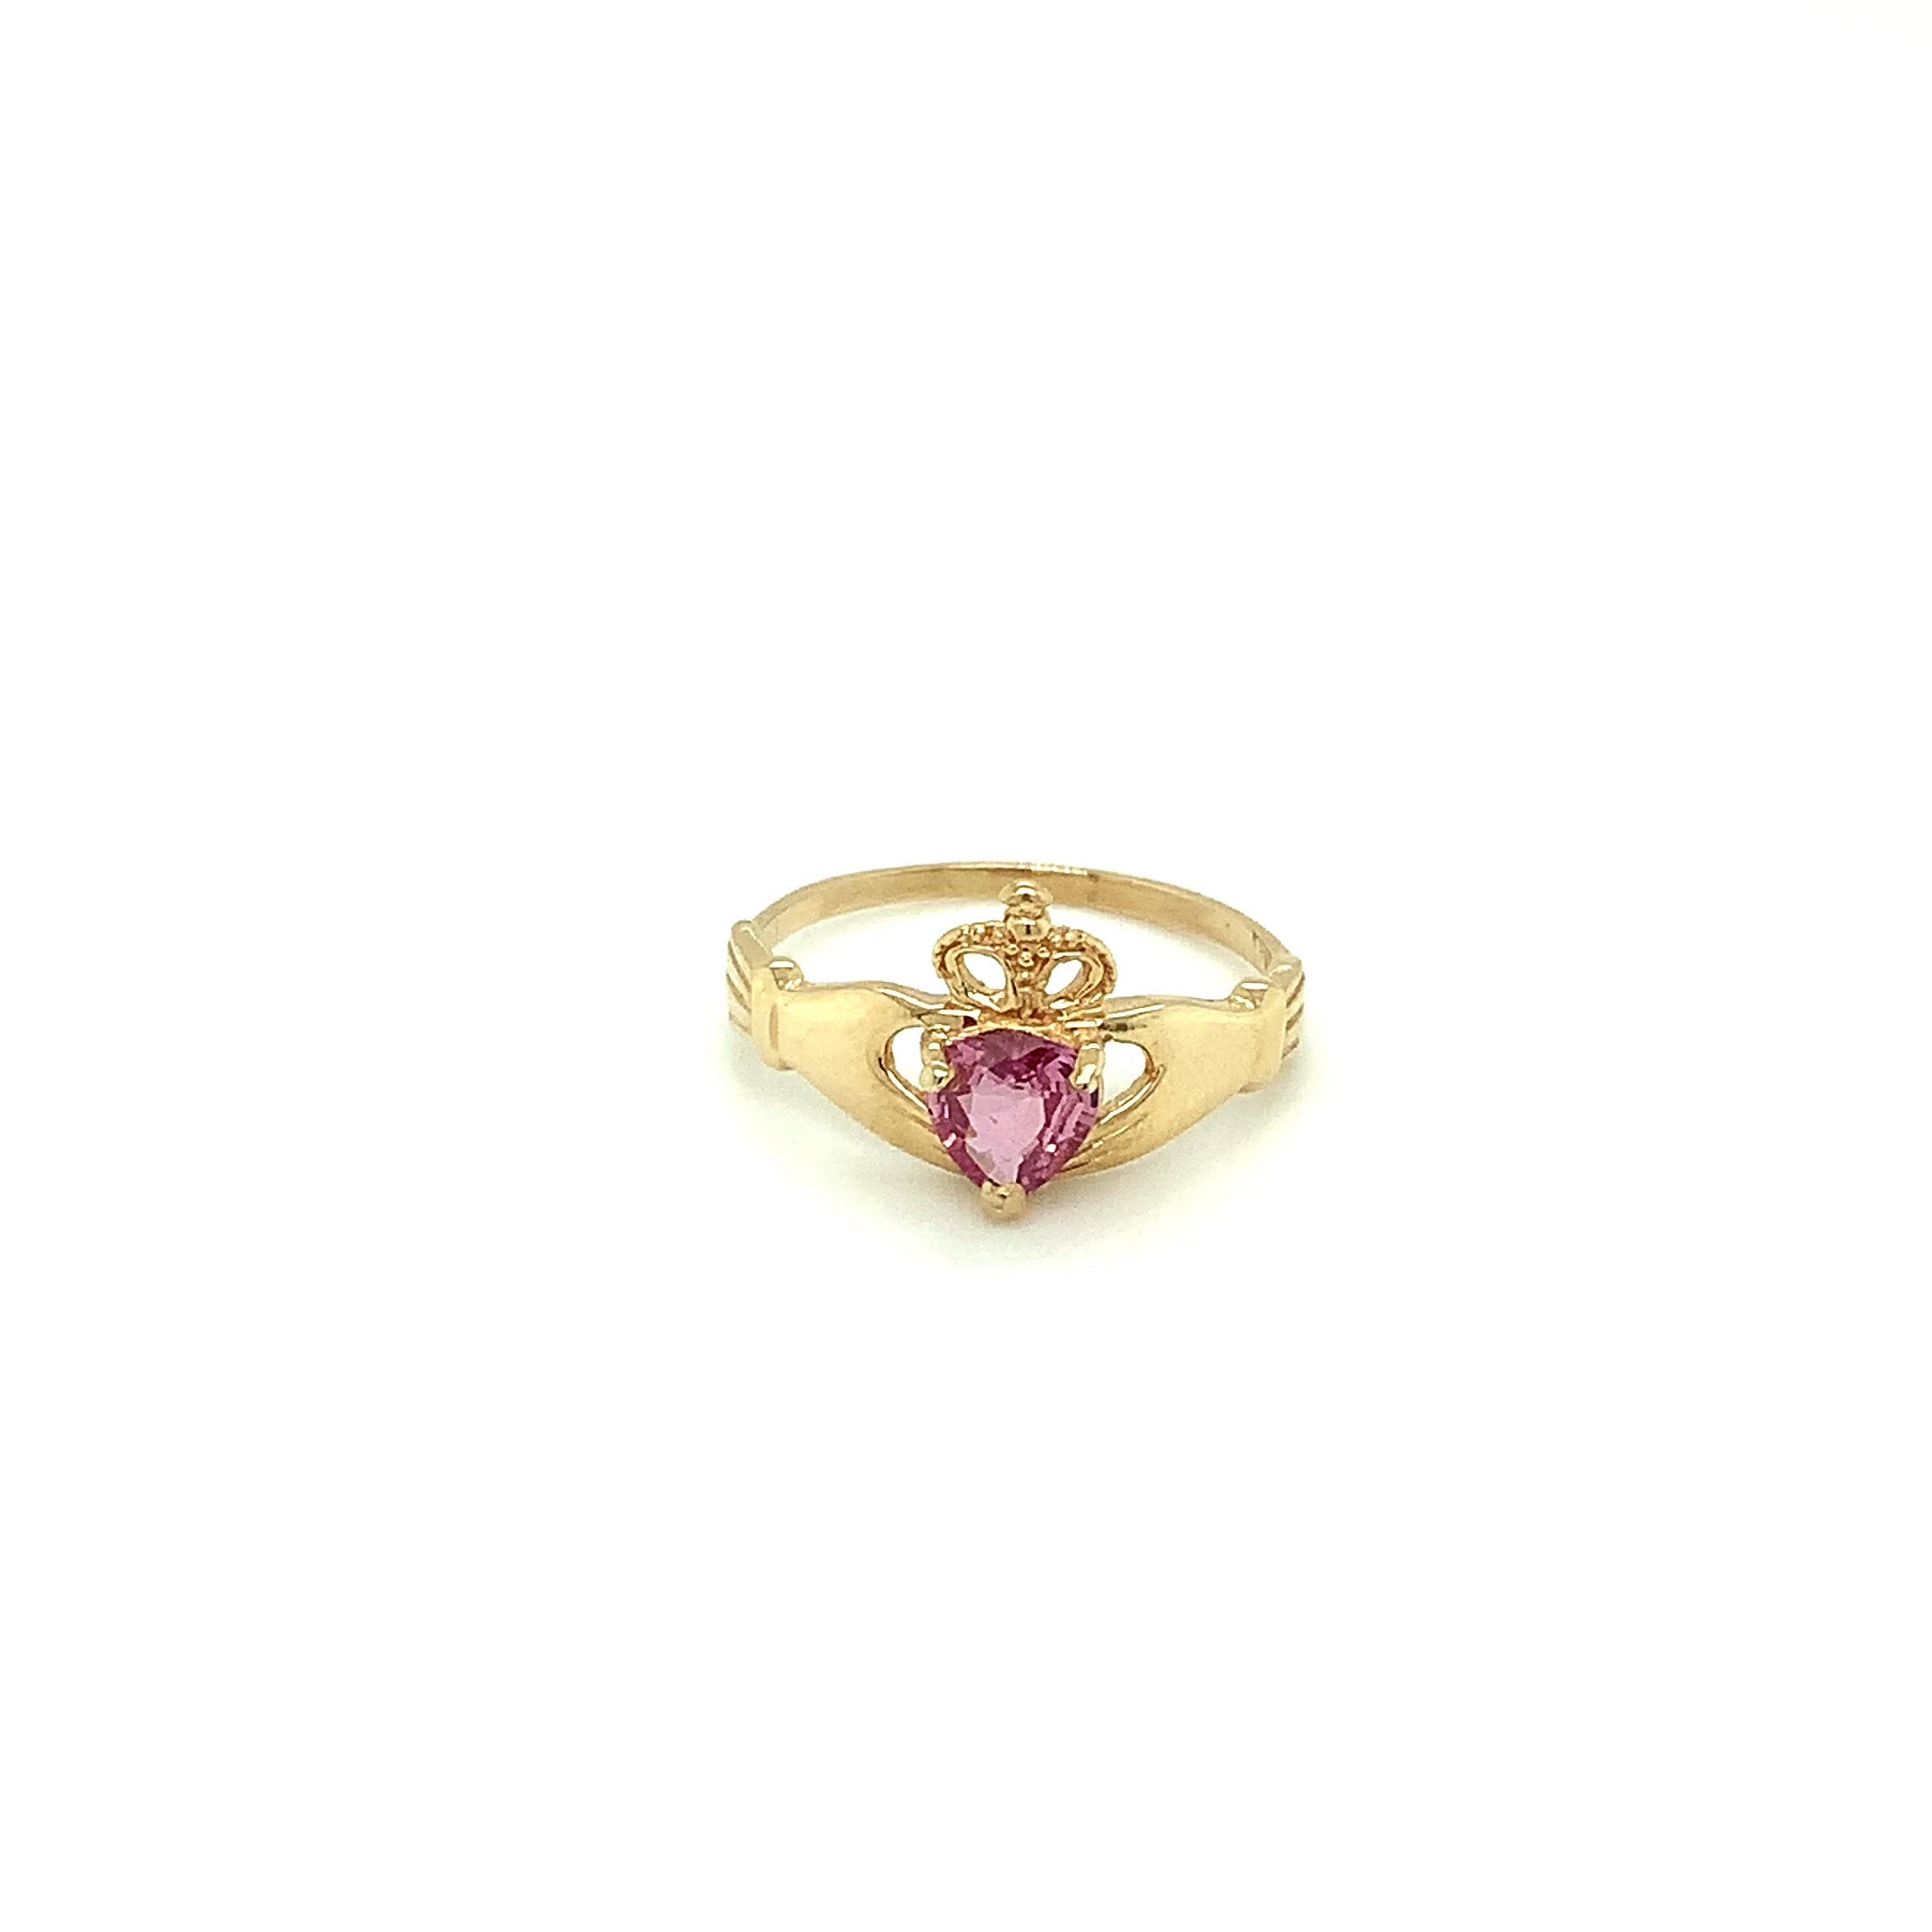 Irish Claddagh Ring Natural Padparadscha Sapphire Ring 14K Solid Gold .79ct Gemstone Ring Heart Ring Engagement Ring Promise Ring Jewellery